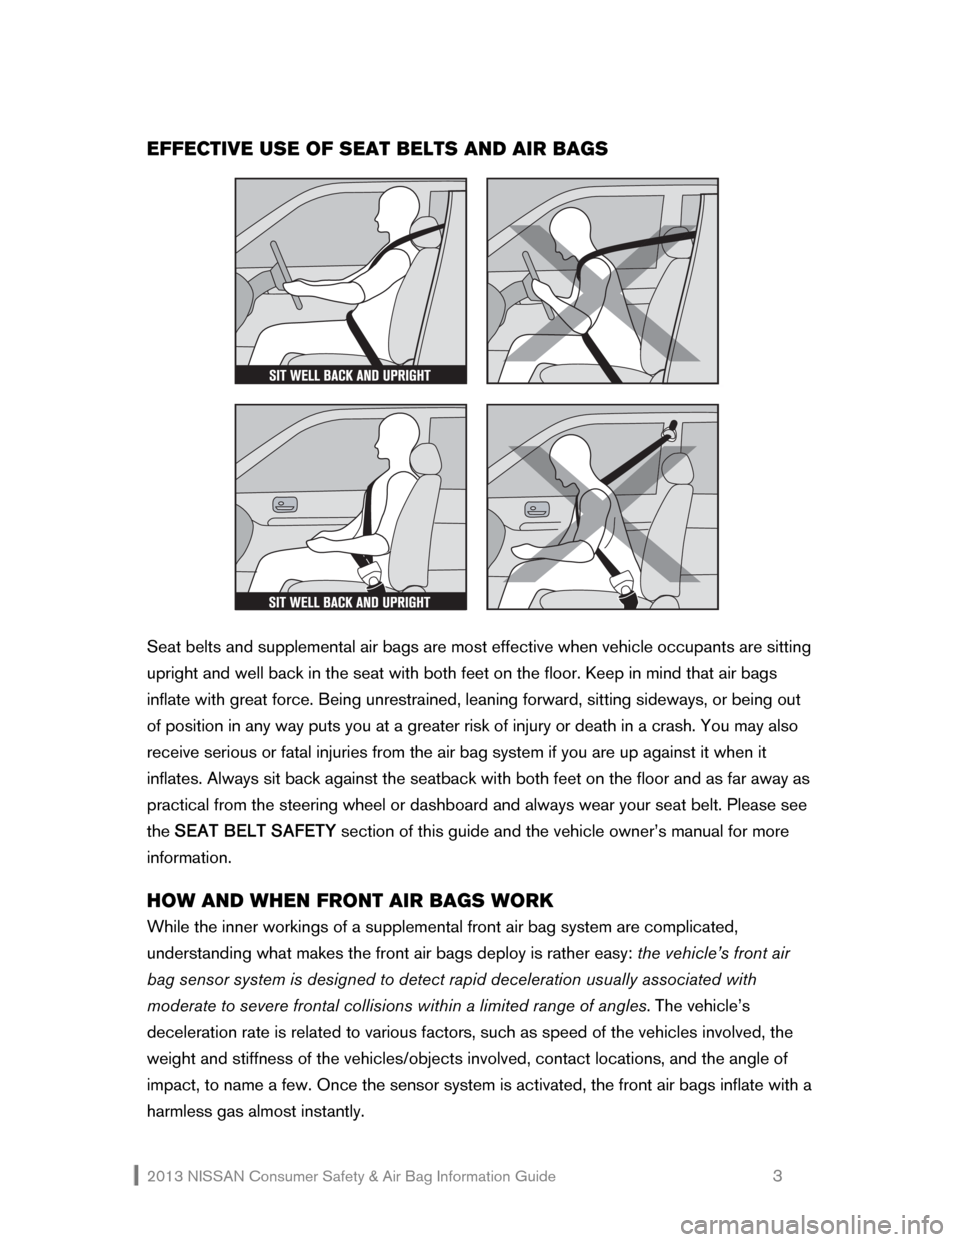 NISSAN XTERRA 2013 N50 / 2.G Consumer Safety Air Bag Information Guide 2013 NISSAN Consumer Safety & Air Bag Information Guide                                                   3 
EFFECTIVE USE OF SEAT BELTS AND AIR BAGS 
 
 
 
Seat belts and supplemental air bags are mo